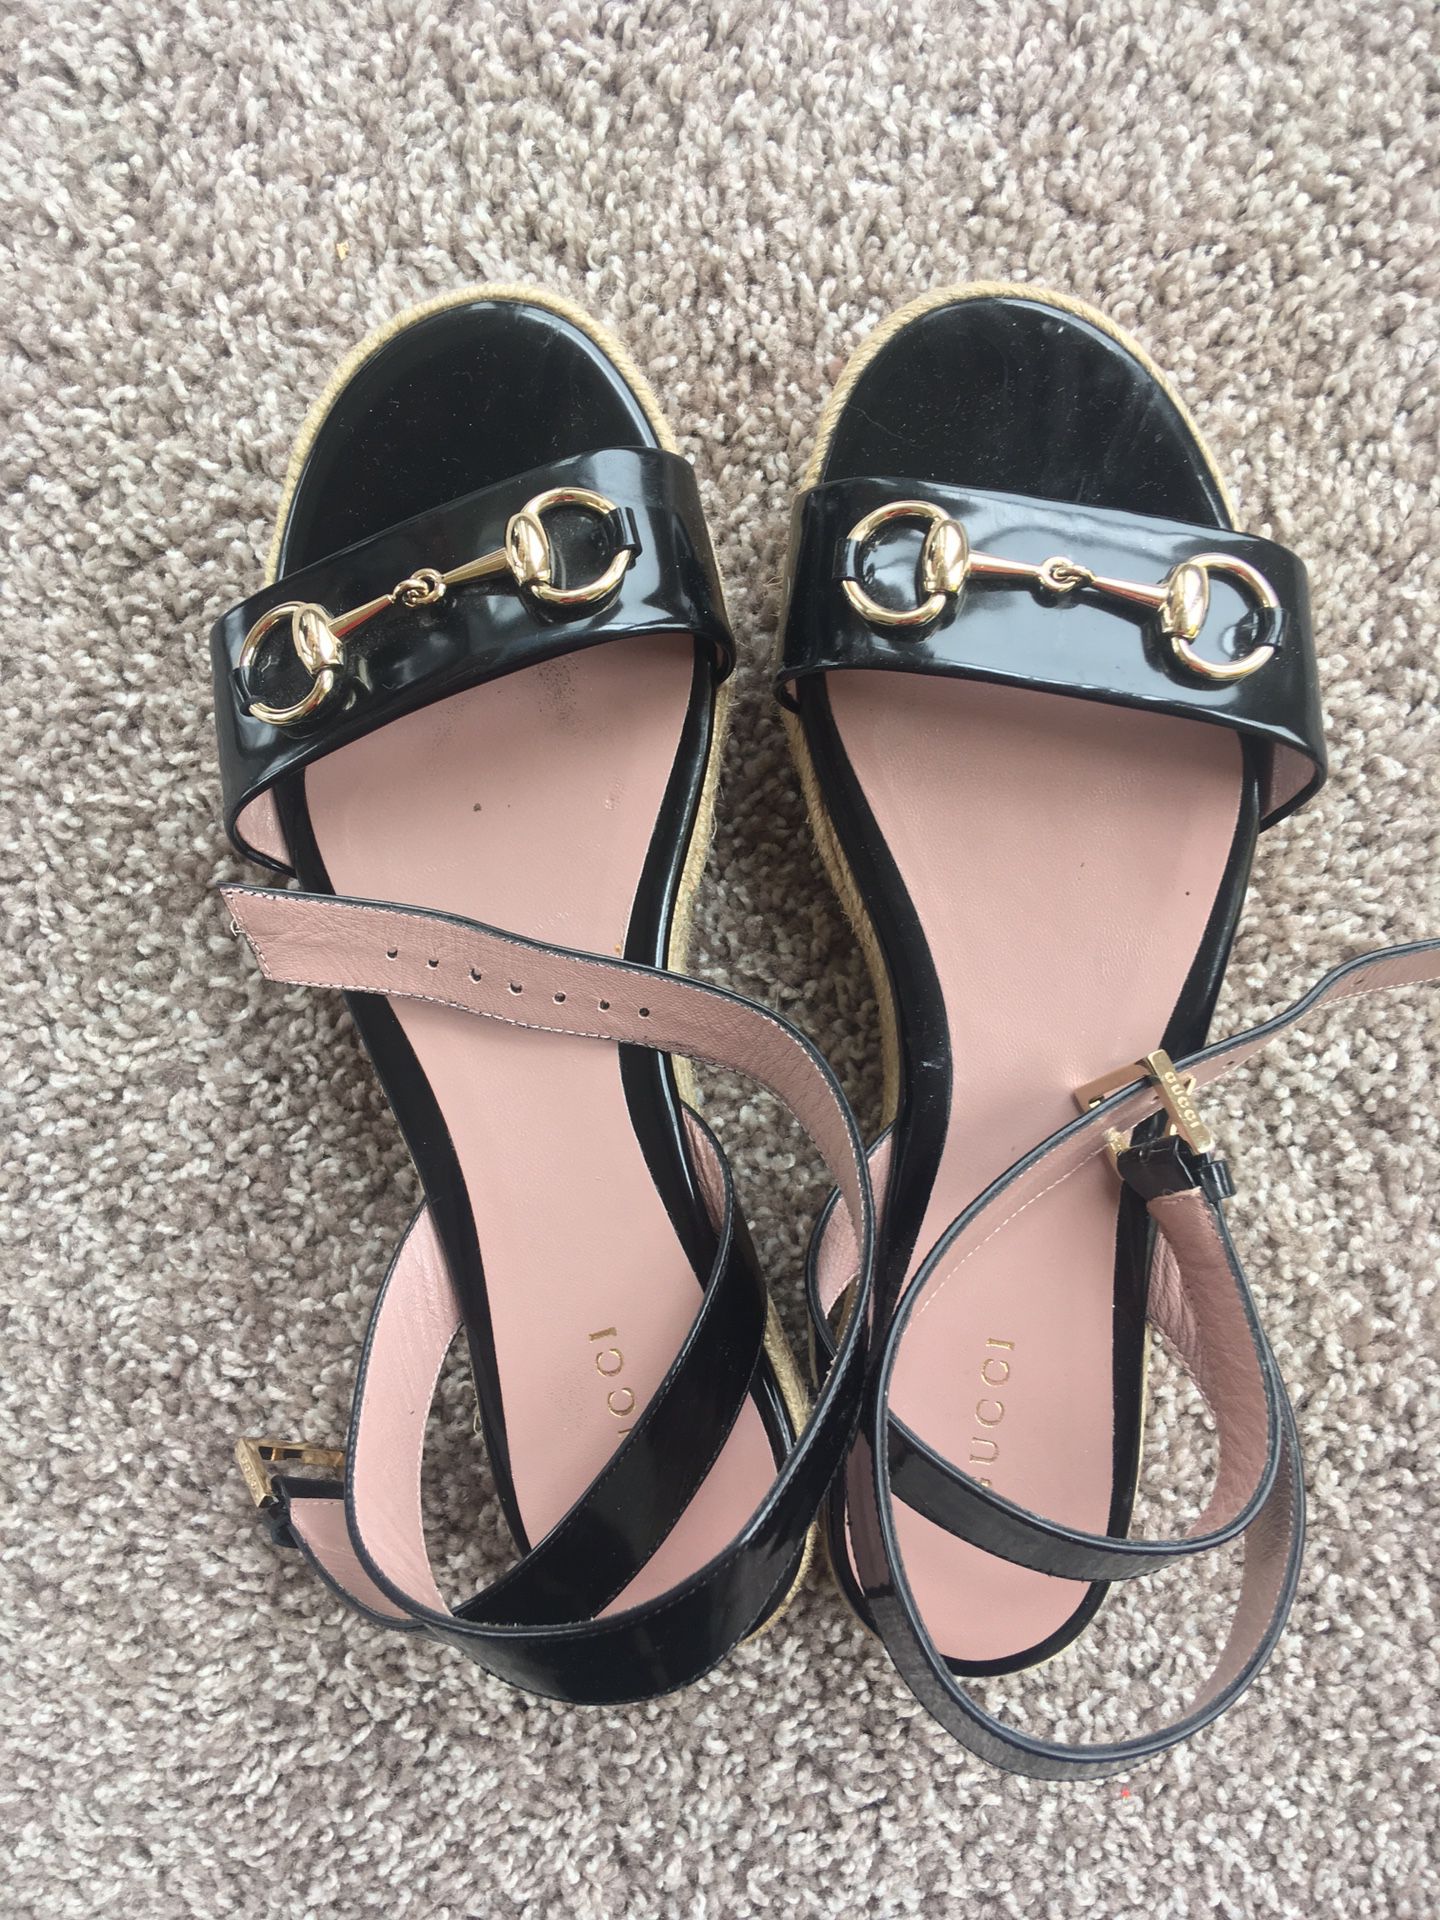 Gucci Wedge Sandals for Sale in Dallas, TX - OfferUp